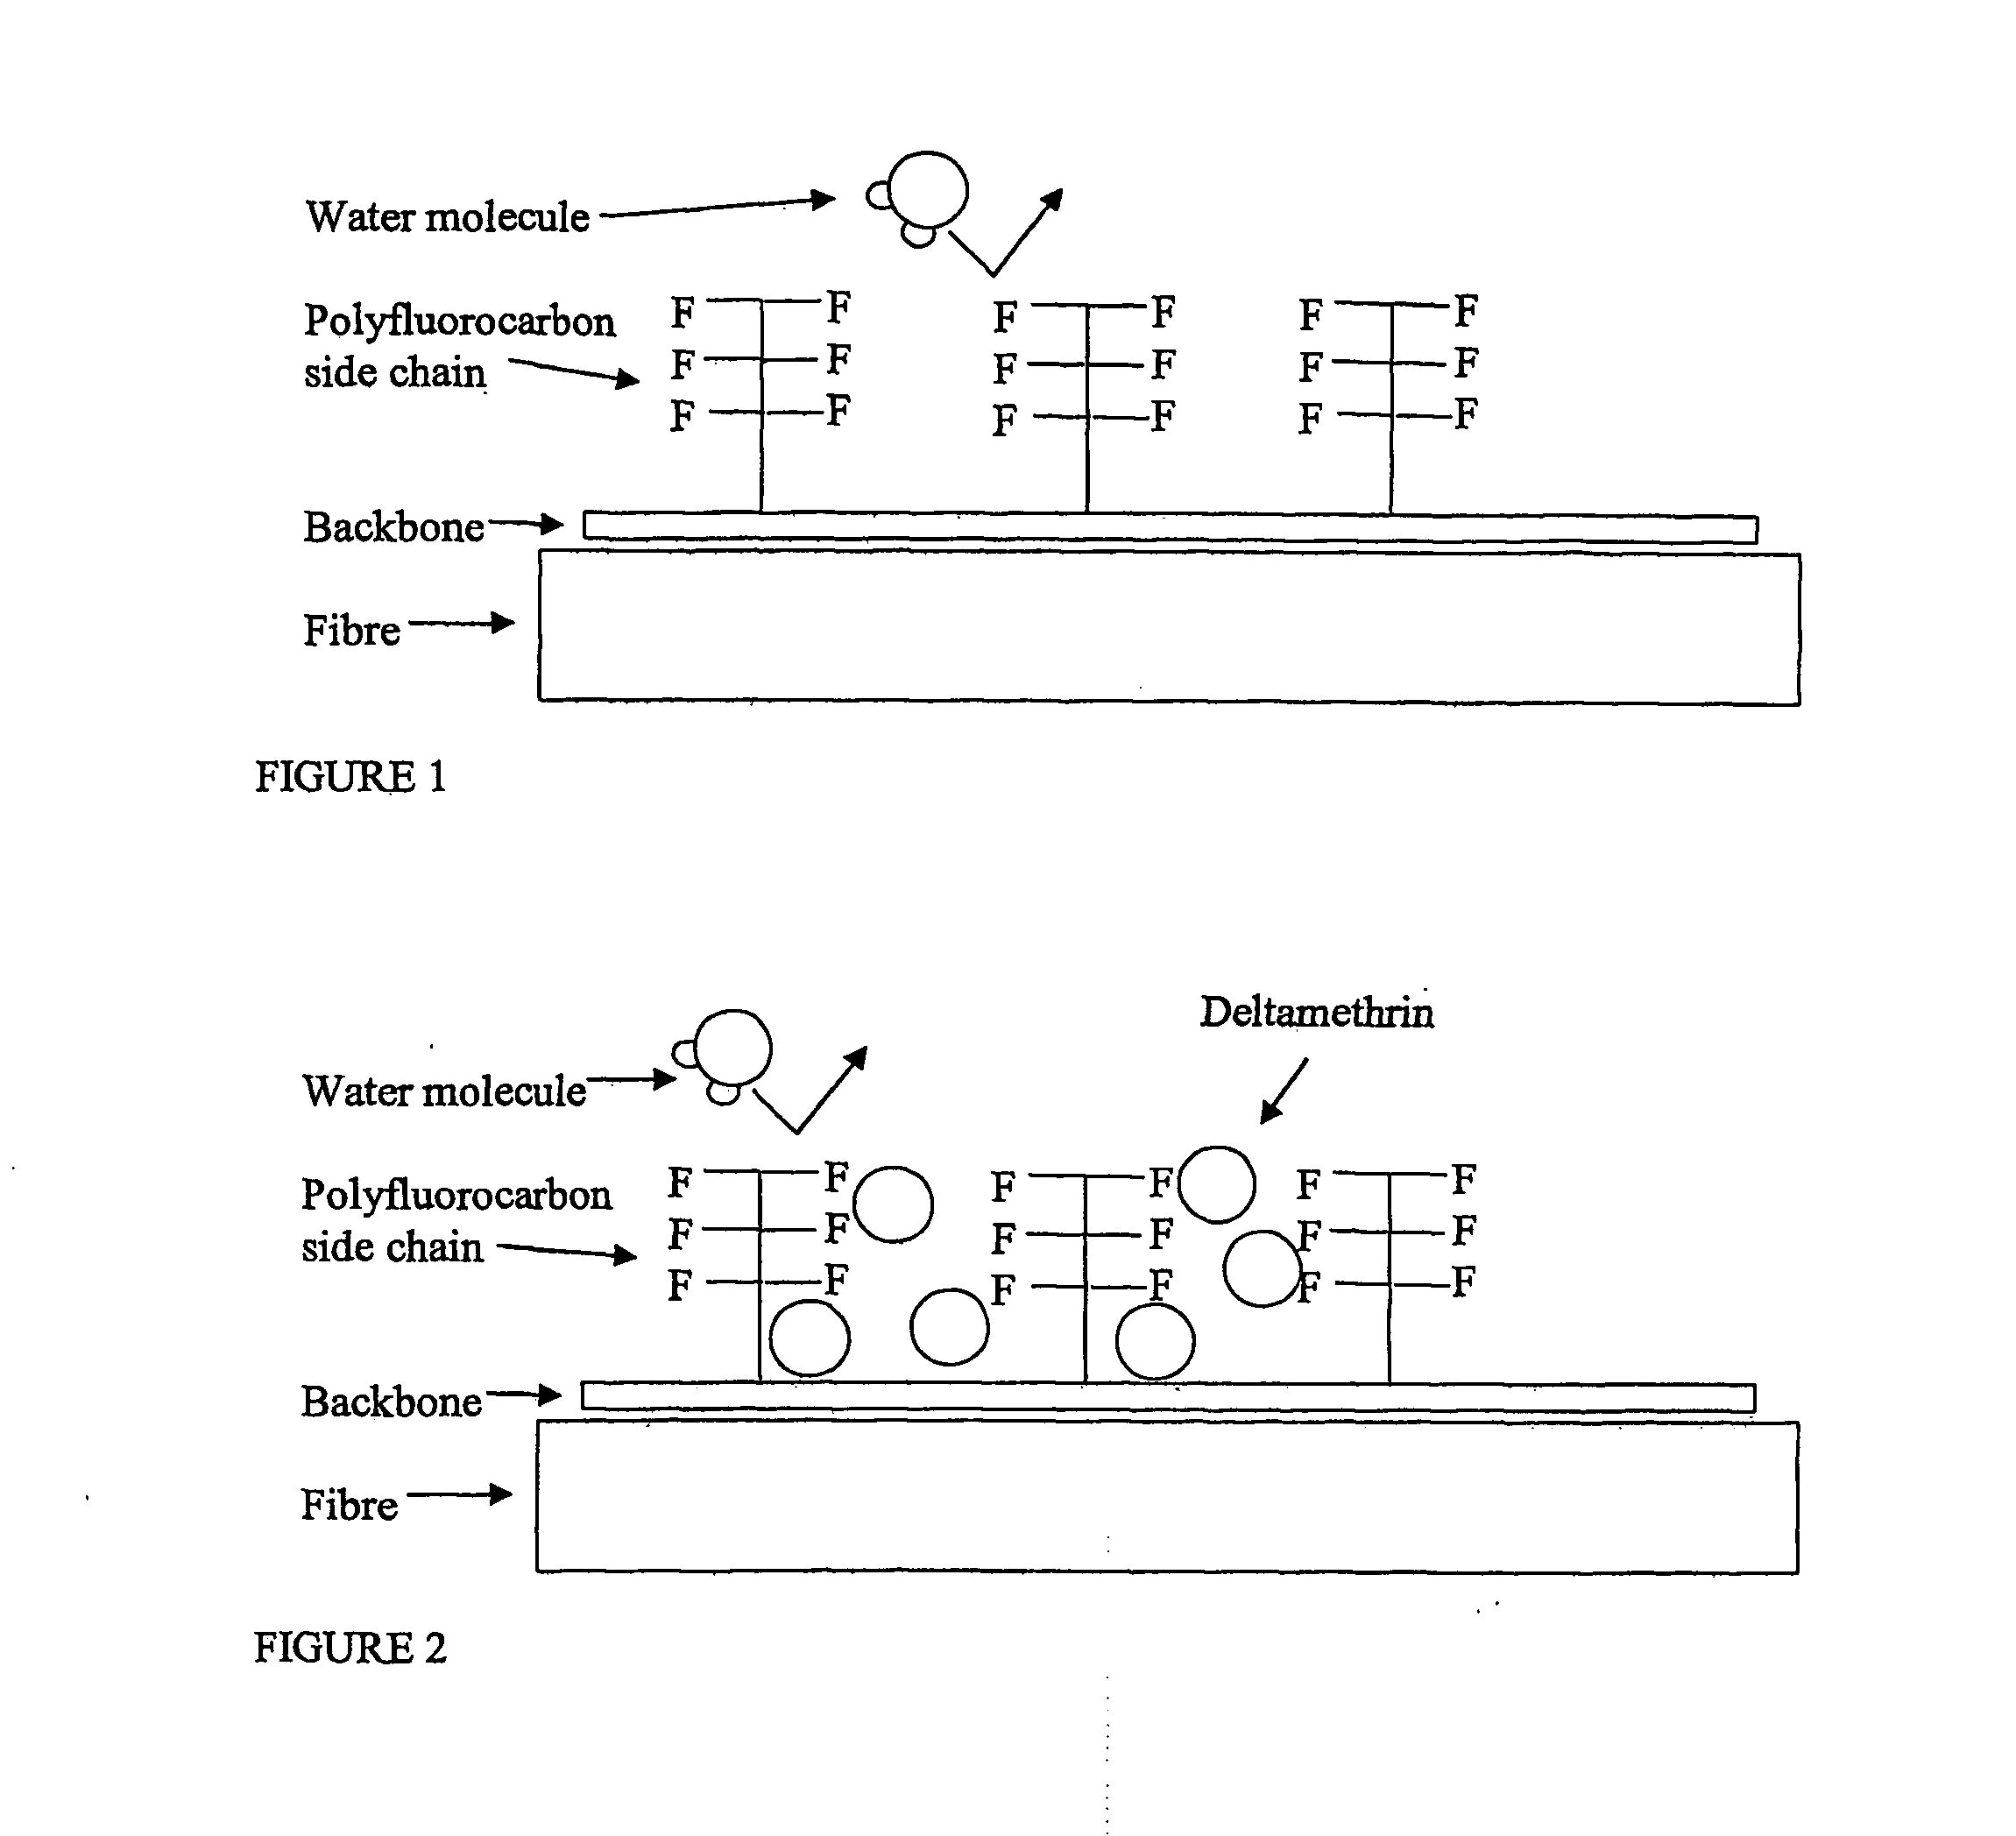 Process for insecticidal impregnation of a fabric or netting or other kind of non-living material